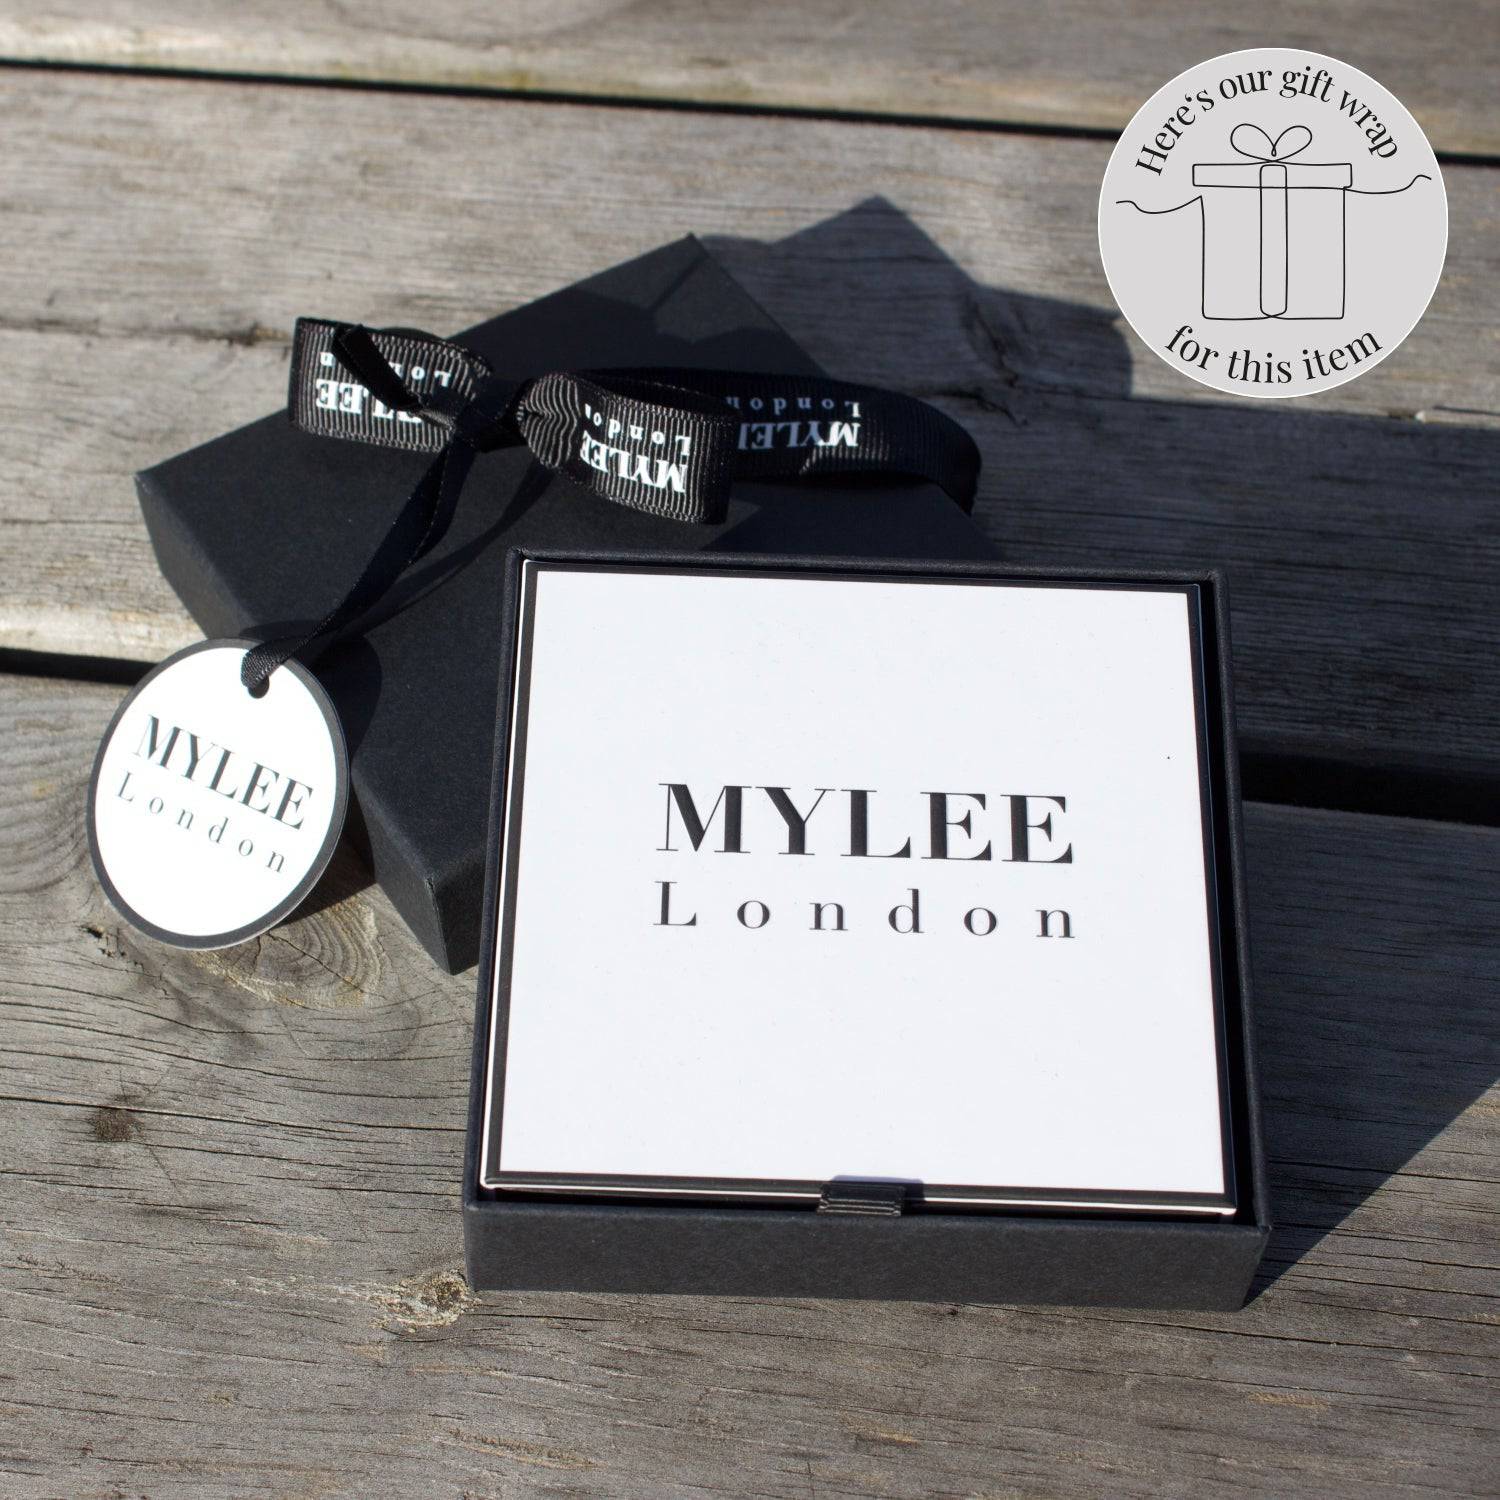 Guinea Pig Silver Necklace - MYLEE London